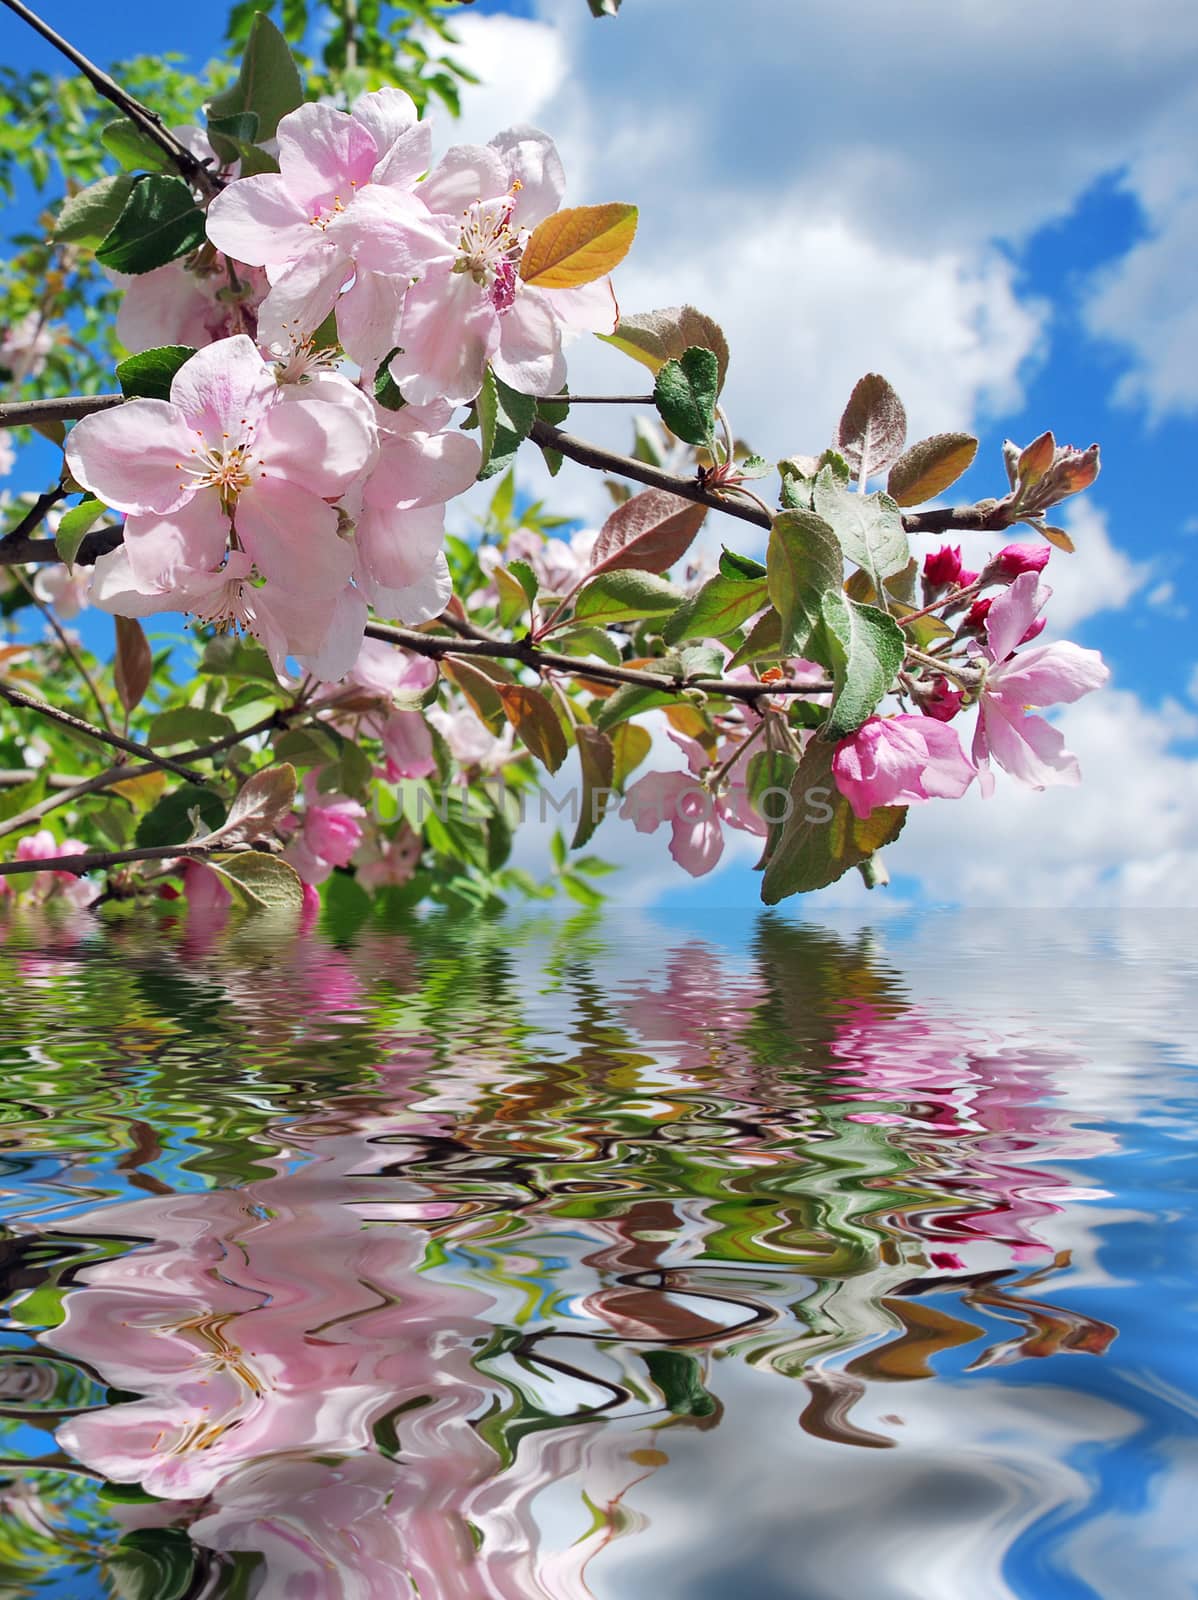 Pink flowers of apple trees against a blue sky reflected in the water surface with small waves